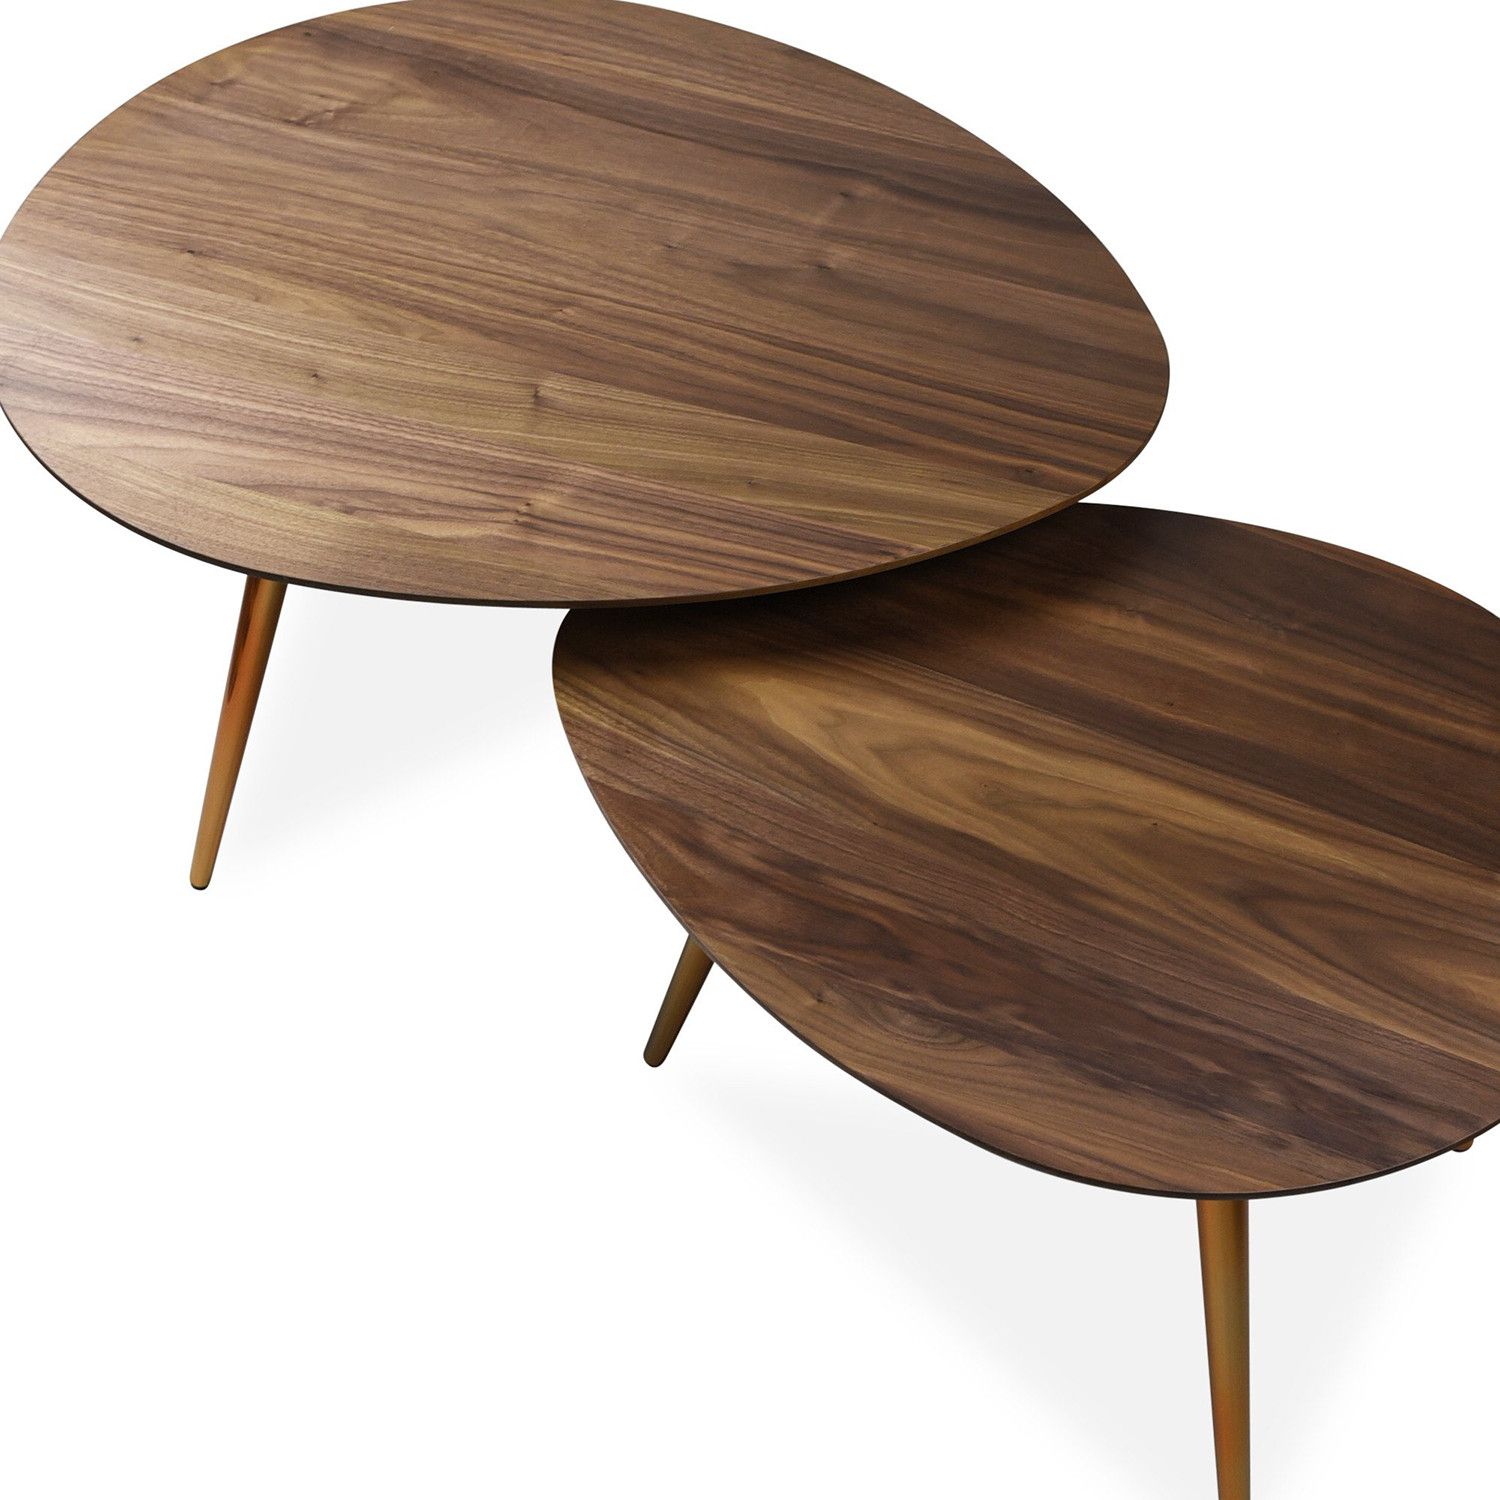 Maddox Mid Century Modern Nesting Coffee Table Set – Edloe Finch In Mid Century Modern Coffee Tables (View 12 of 15)